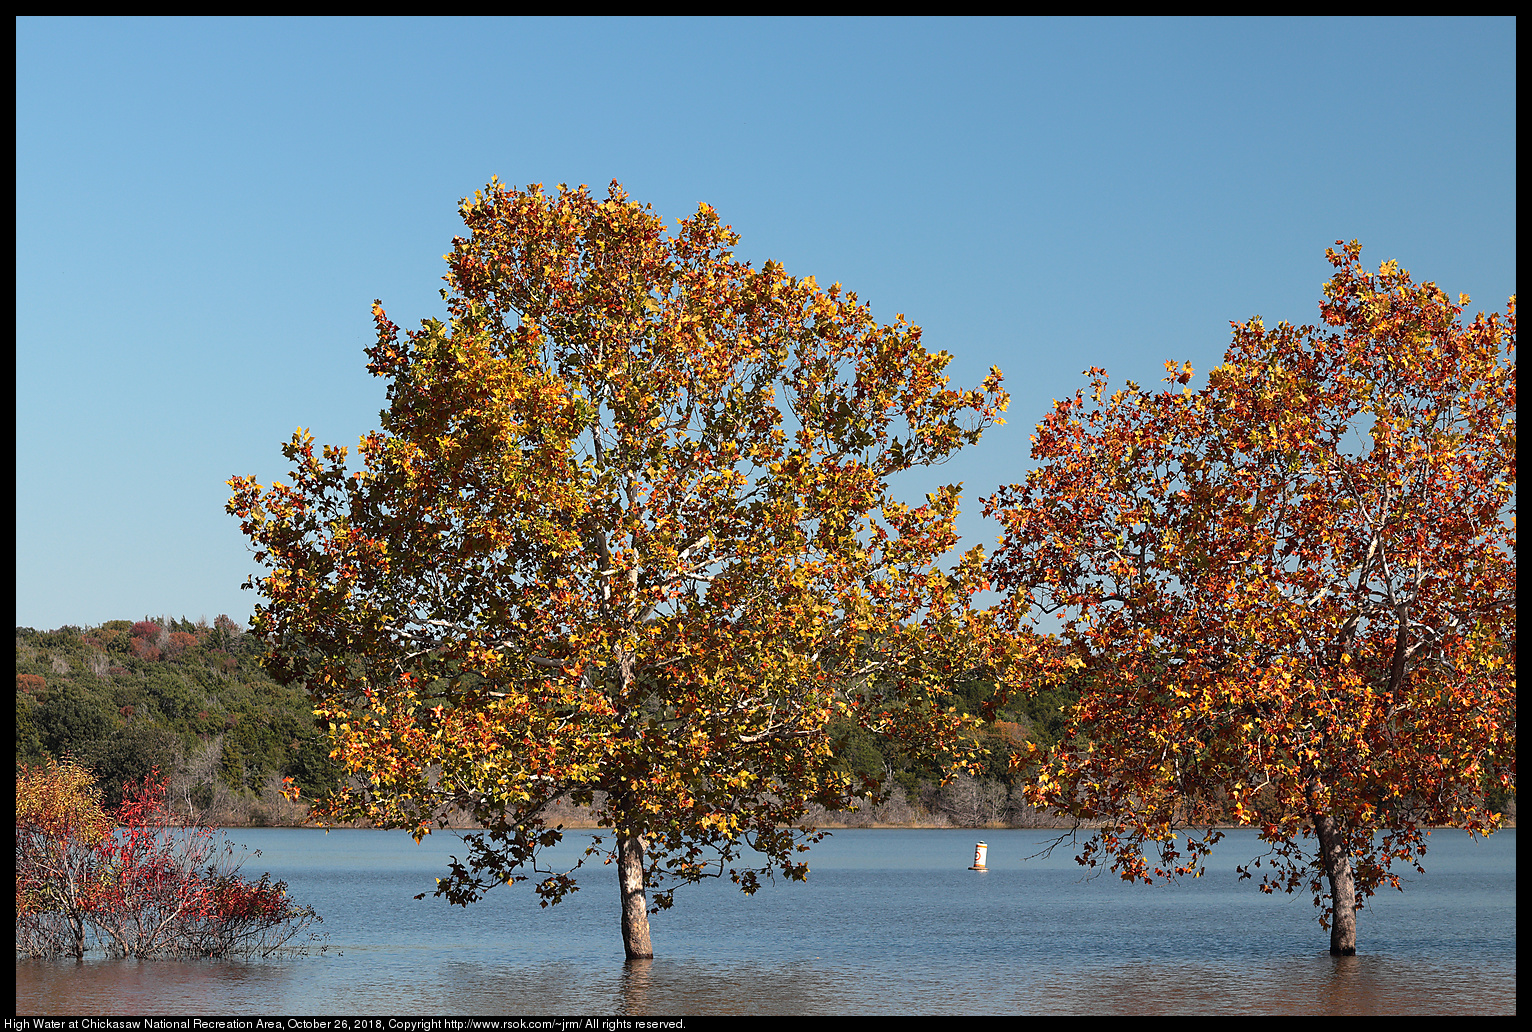 High Water at Chickasaw National Recreation Area, October 26, 2018